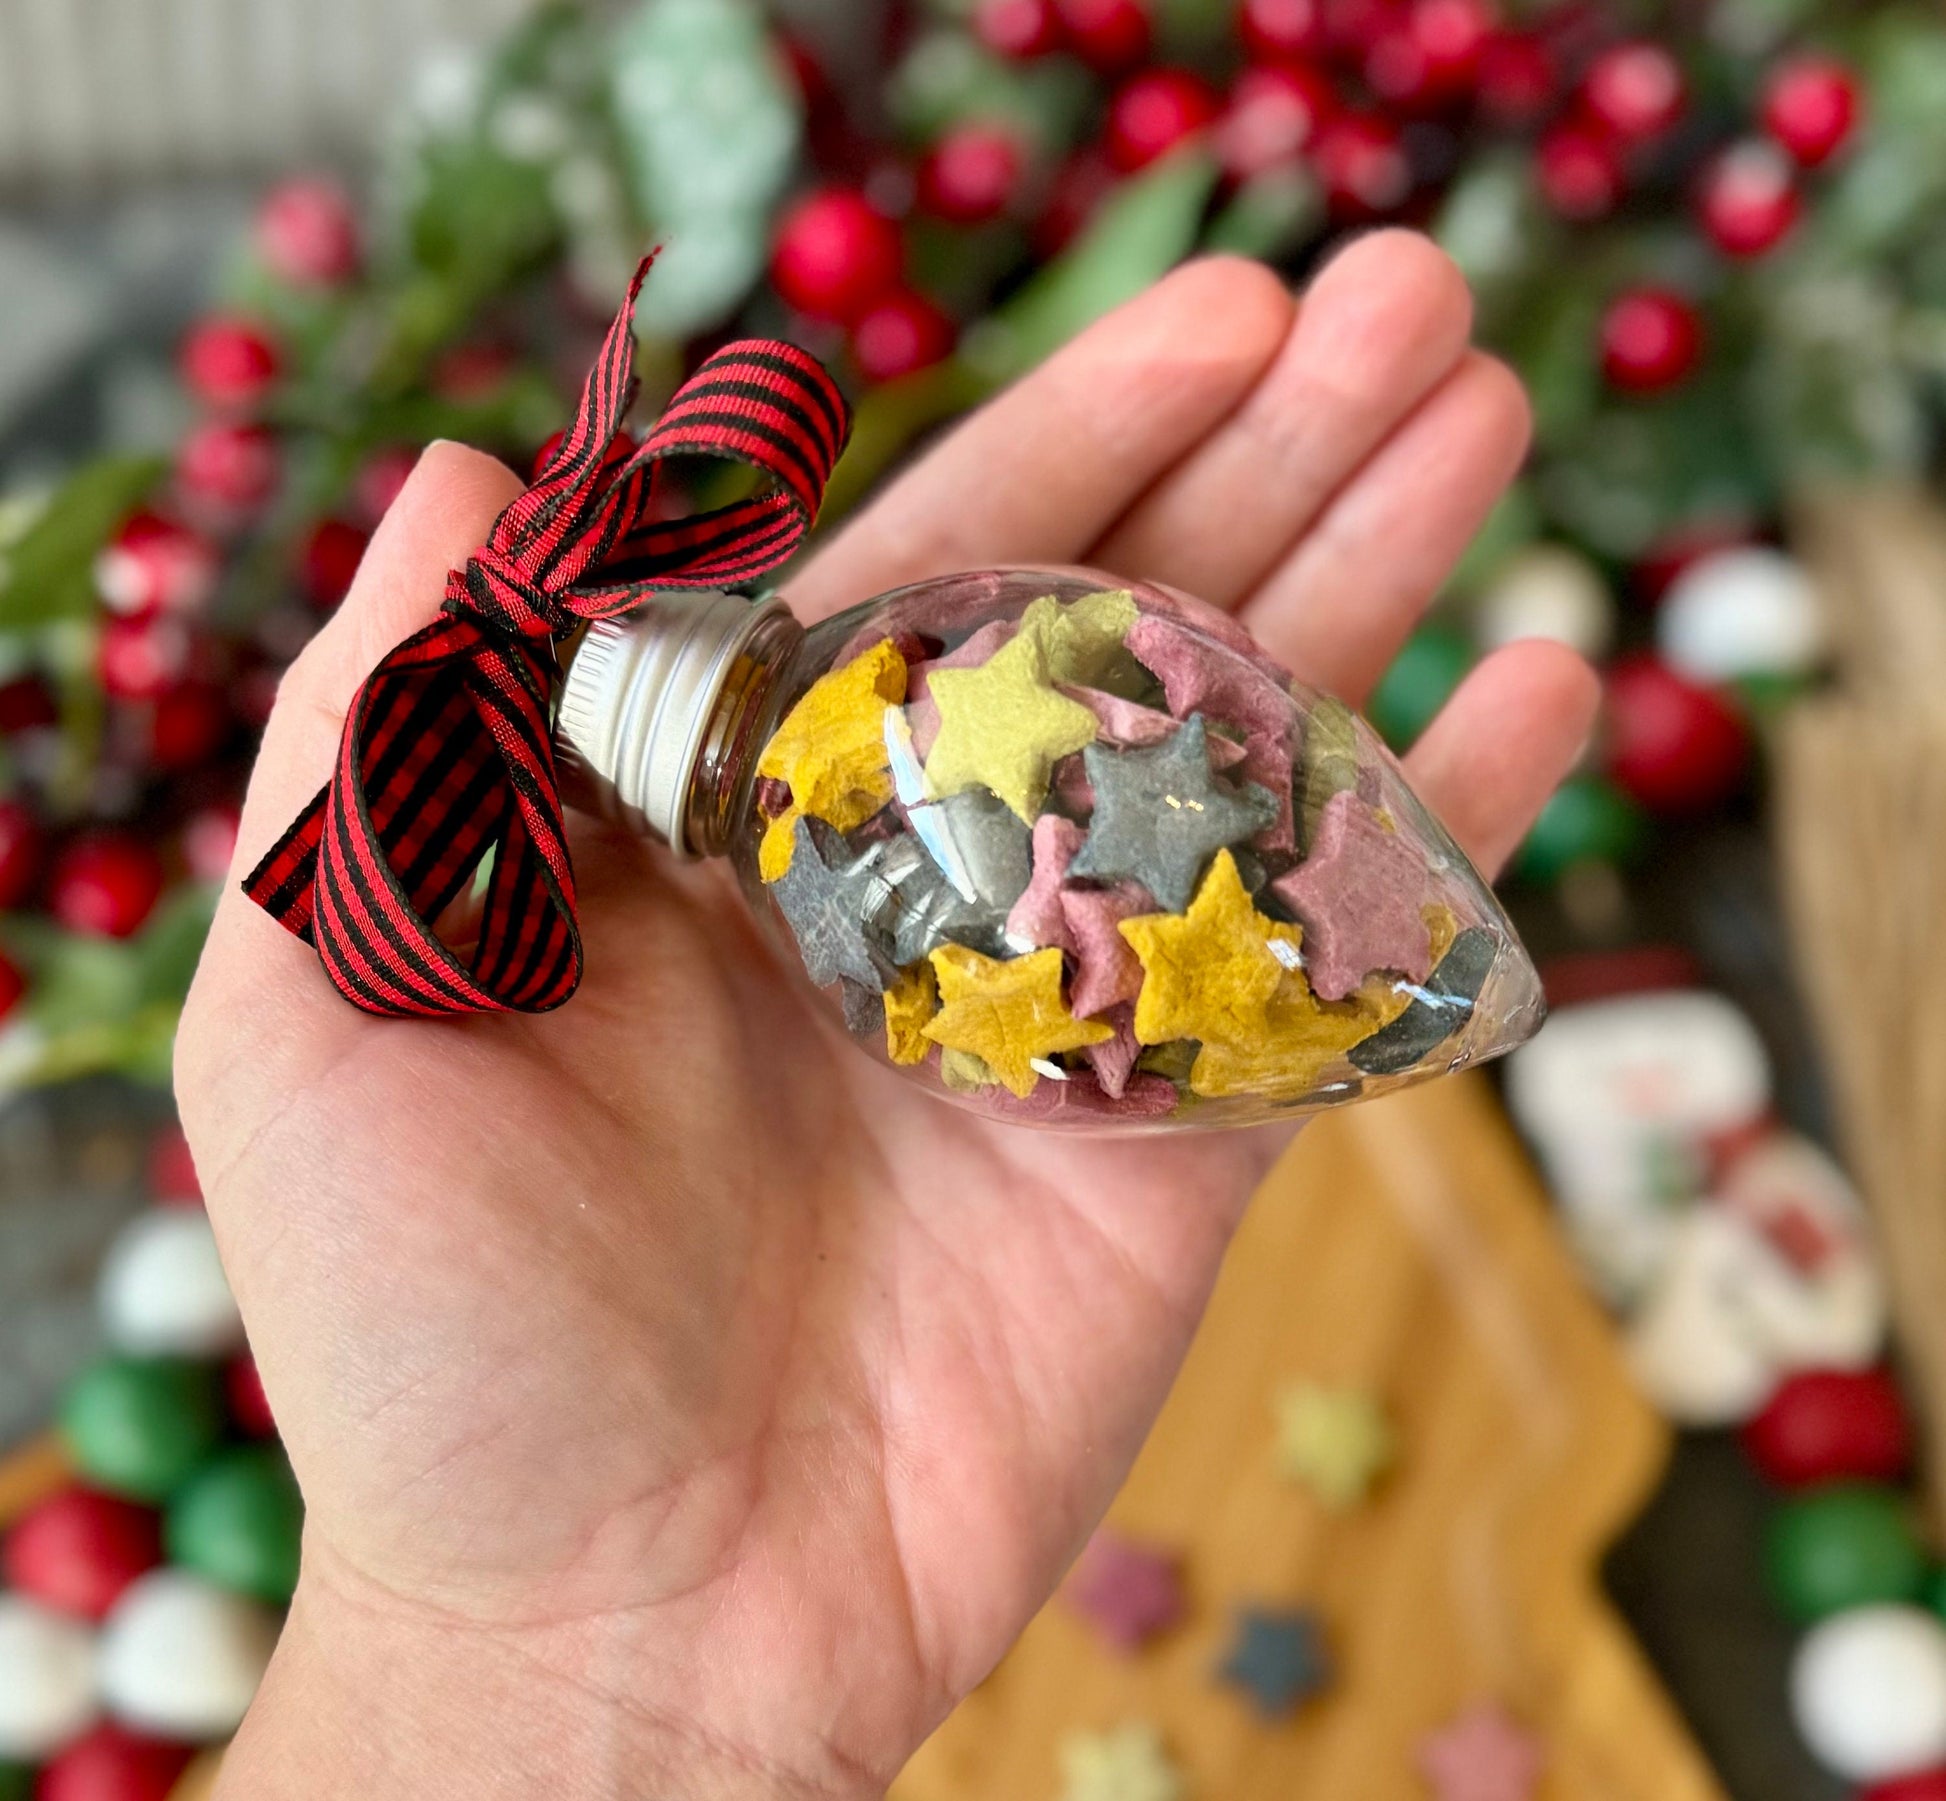 Holiday Lights~ Winter Inspired Bite Sized Treats for Rabbits, Guinea Pigs, Hamsters, Mice, and Small Pets, All Natural, Organic & Healthy